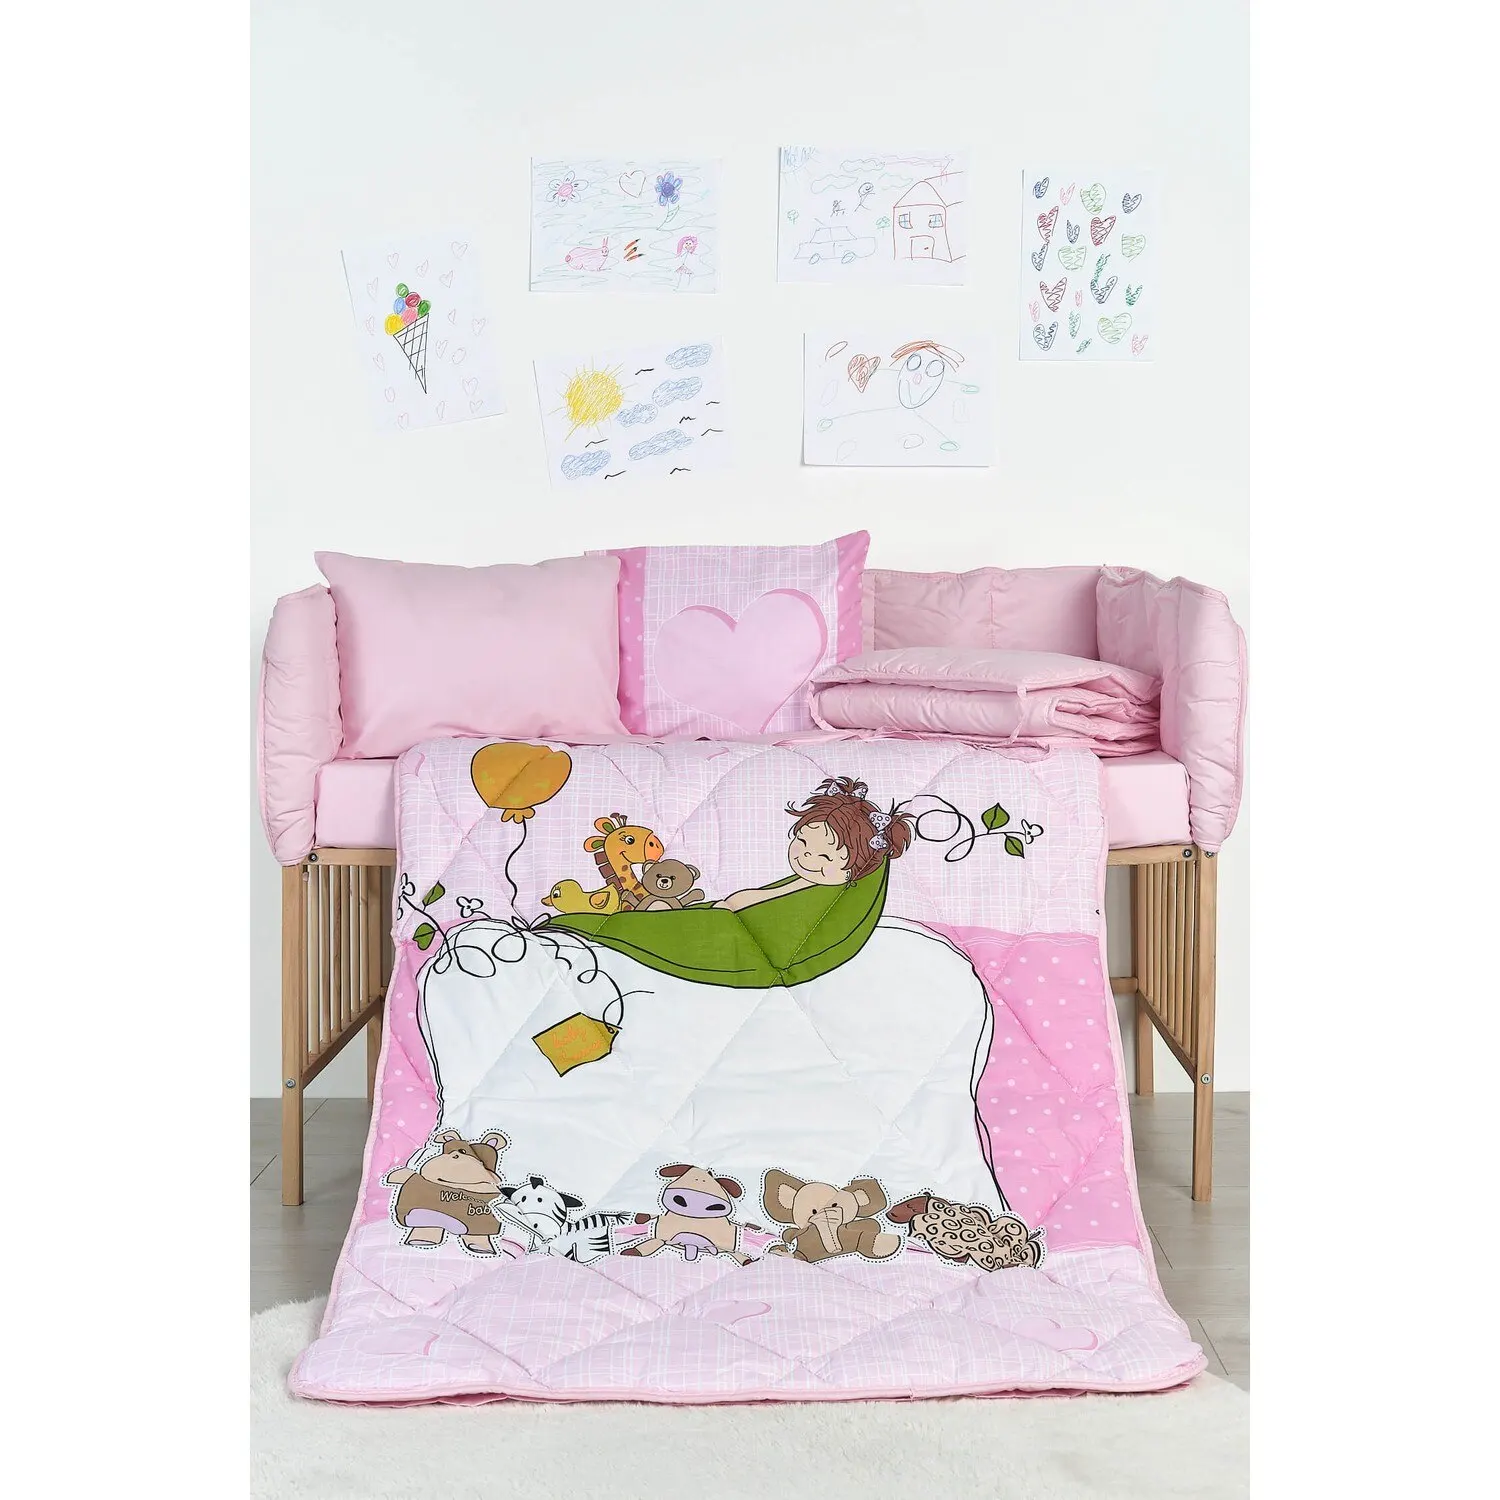 YOUR WONDERFUL Drape Baby Sleeping Set in  Pink color.